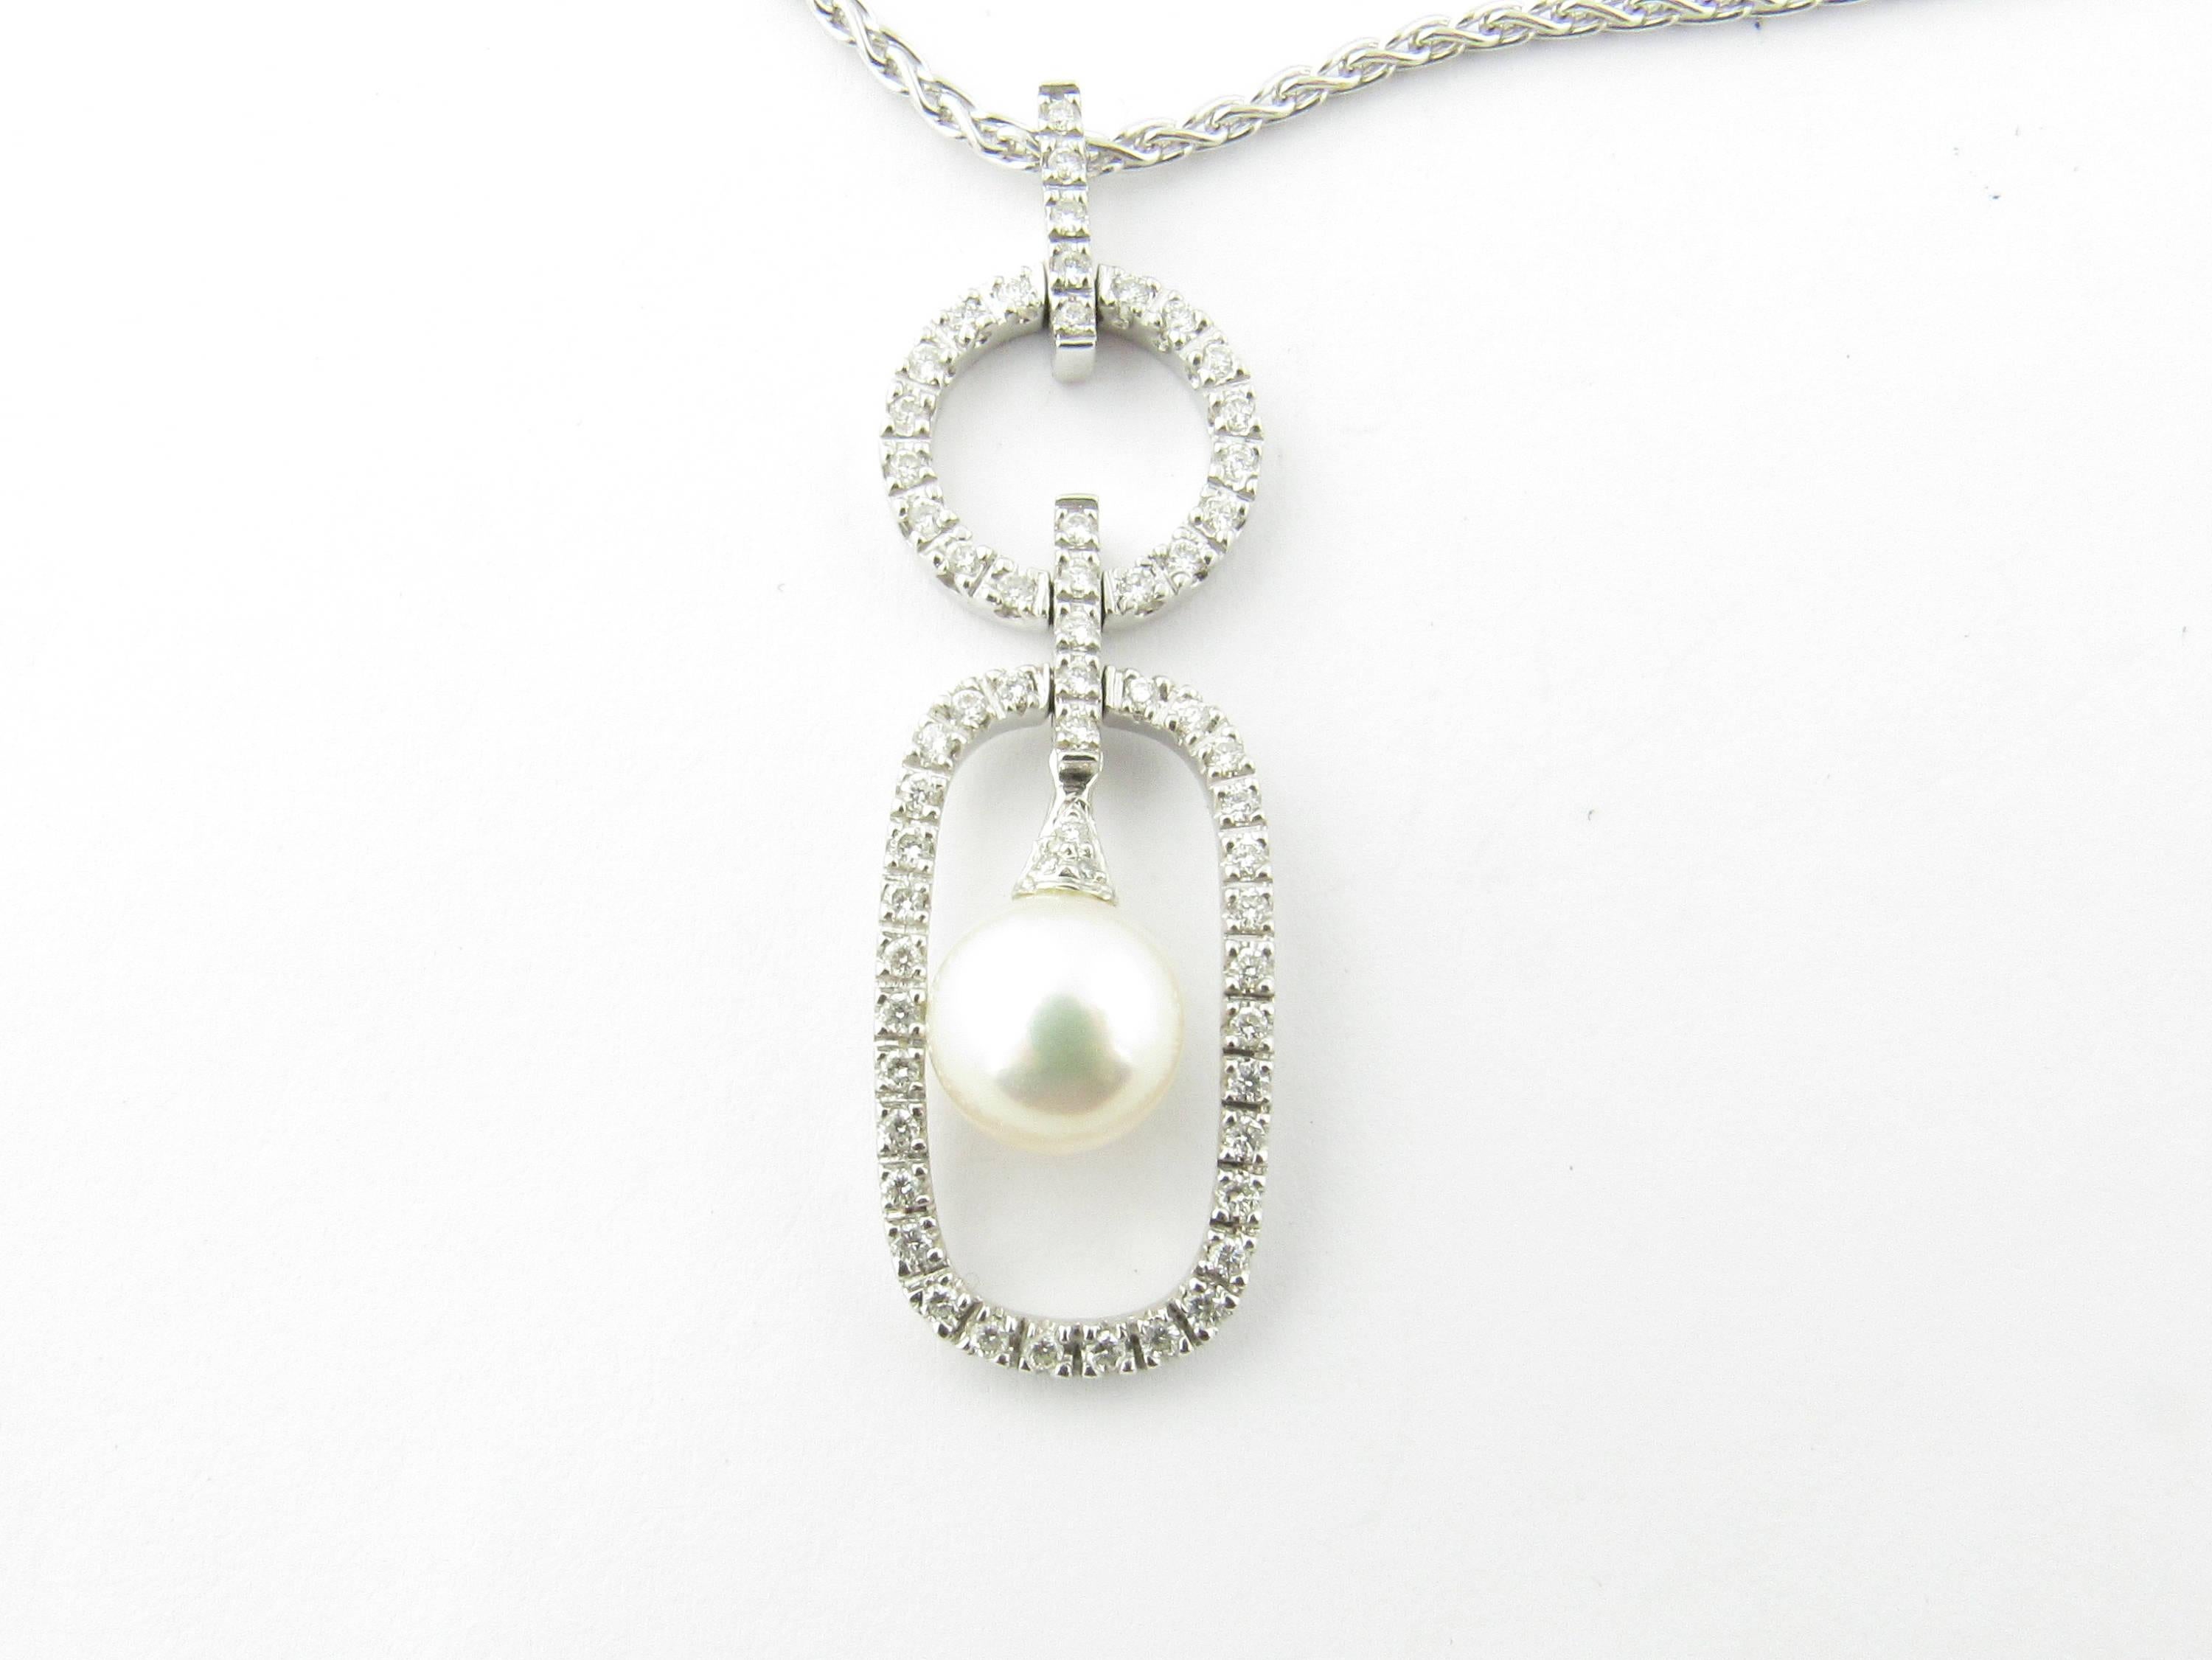 Vintage 18 Karat White Gold Pearl and Diamond Pendant Necklace-

This spectacular pendant features one dangling 9 mm pearl surrounded by 59 round brilliant cut diamonds. Suspended from a classic 18K white gold necklace.

Approximate total diamond